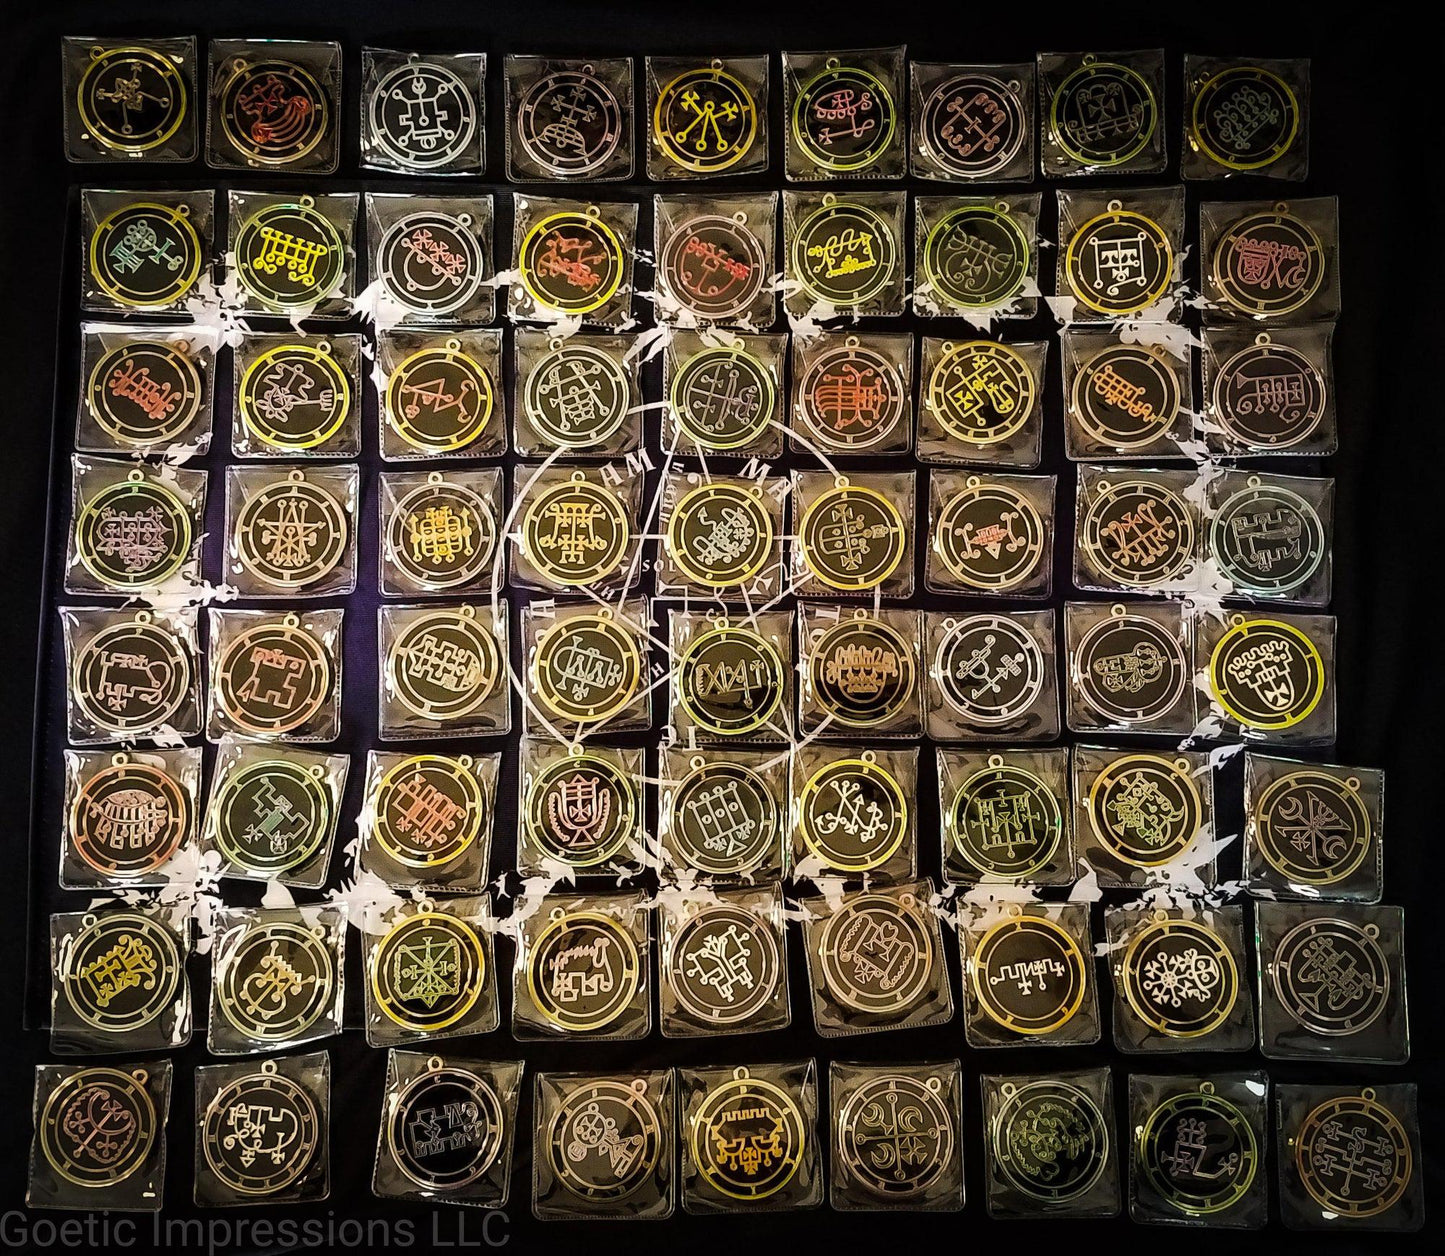 All 72 goetic seal medallions